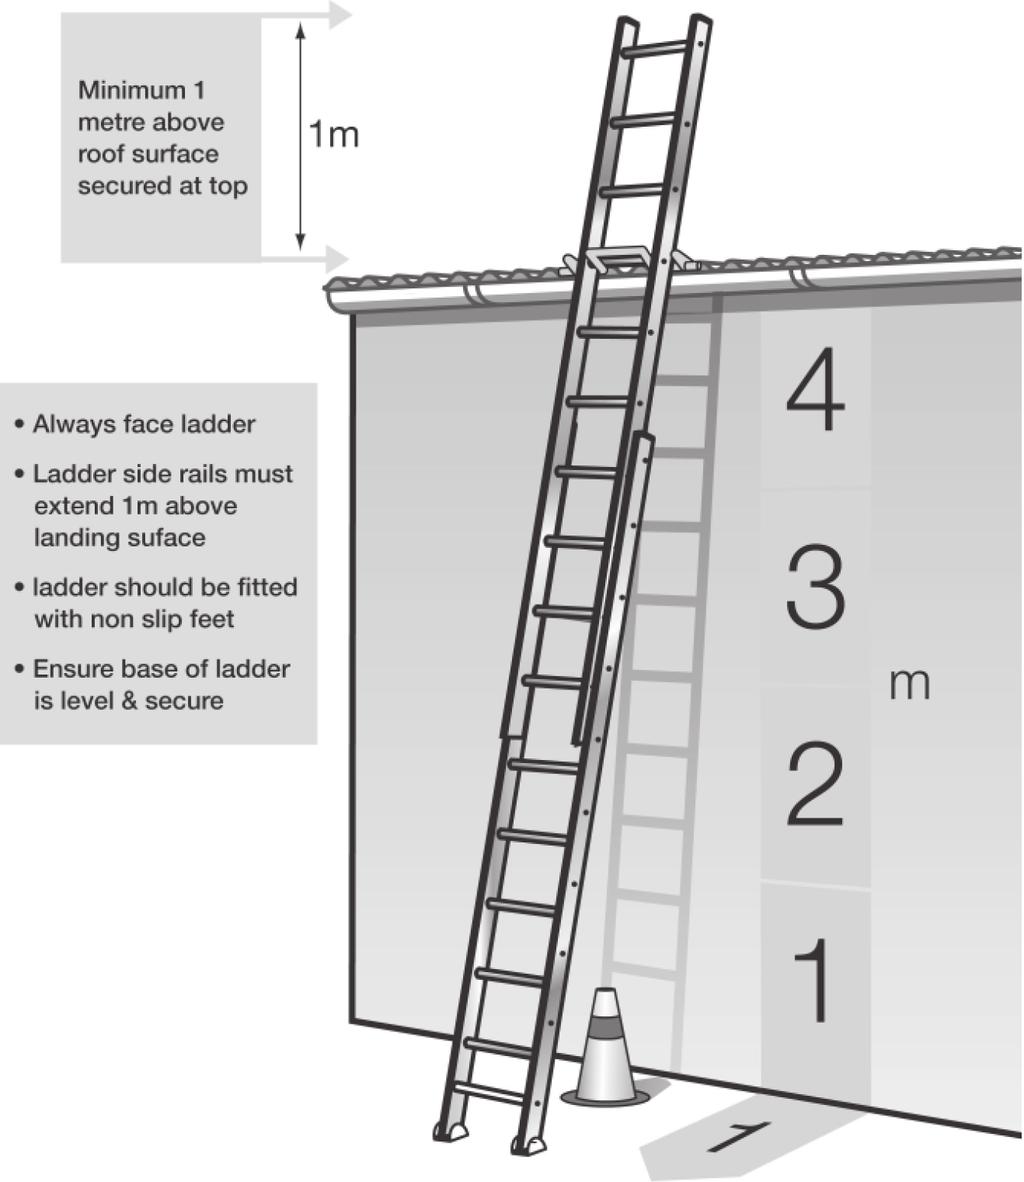 Further information can be obtained from AS/NZS 1892.1 Portable Ladders Part 5: Selection, Safe Use and Care.